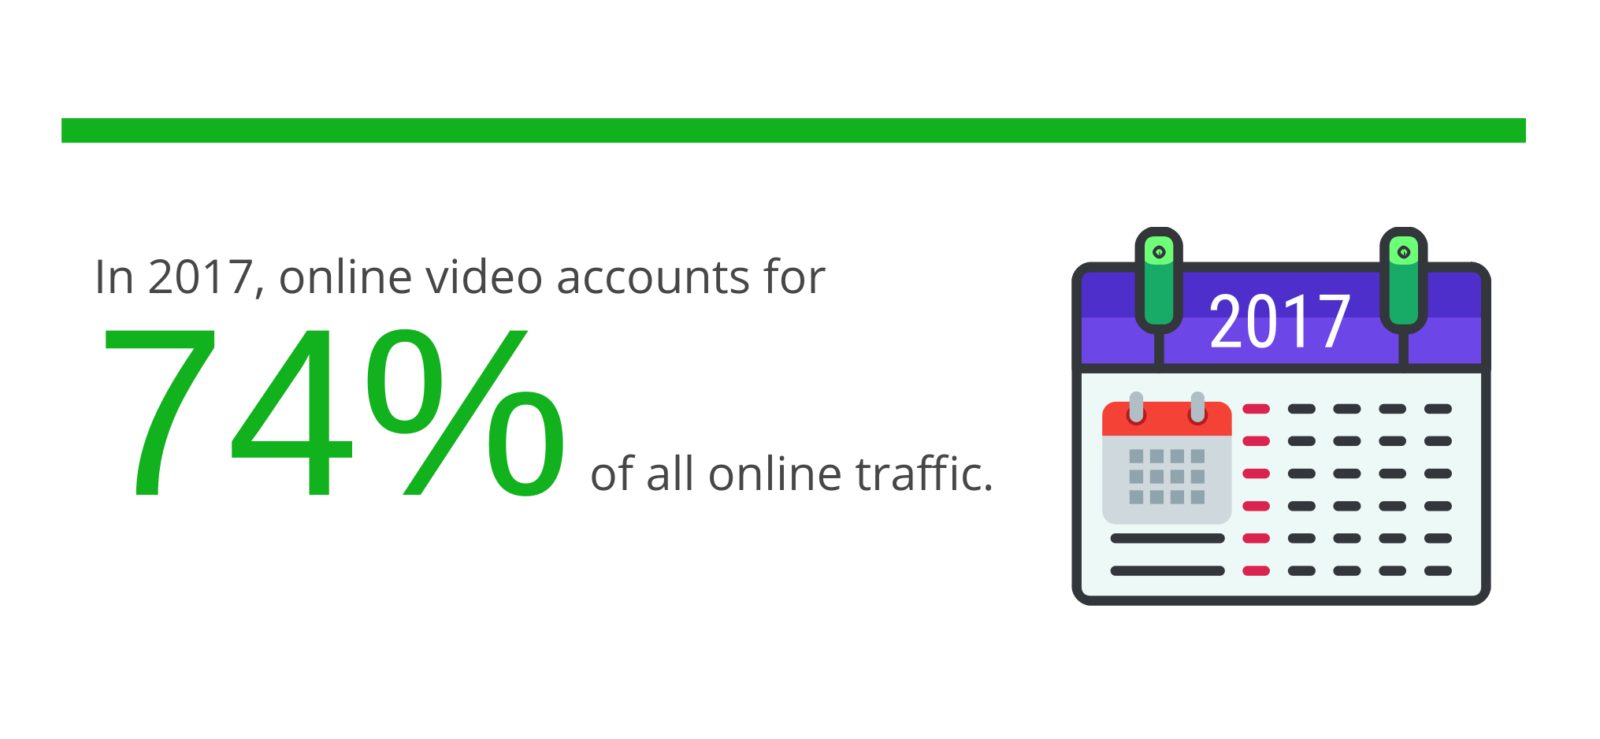 In 2017, online video accounts for 74% of all online traffic.